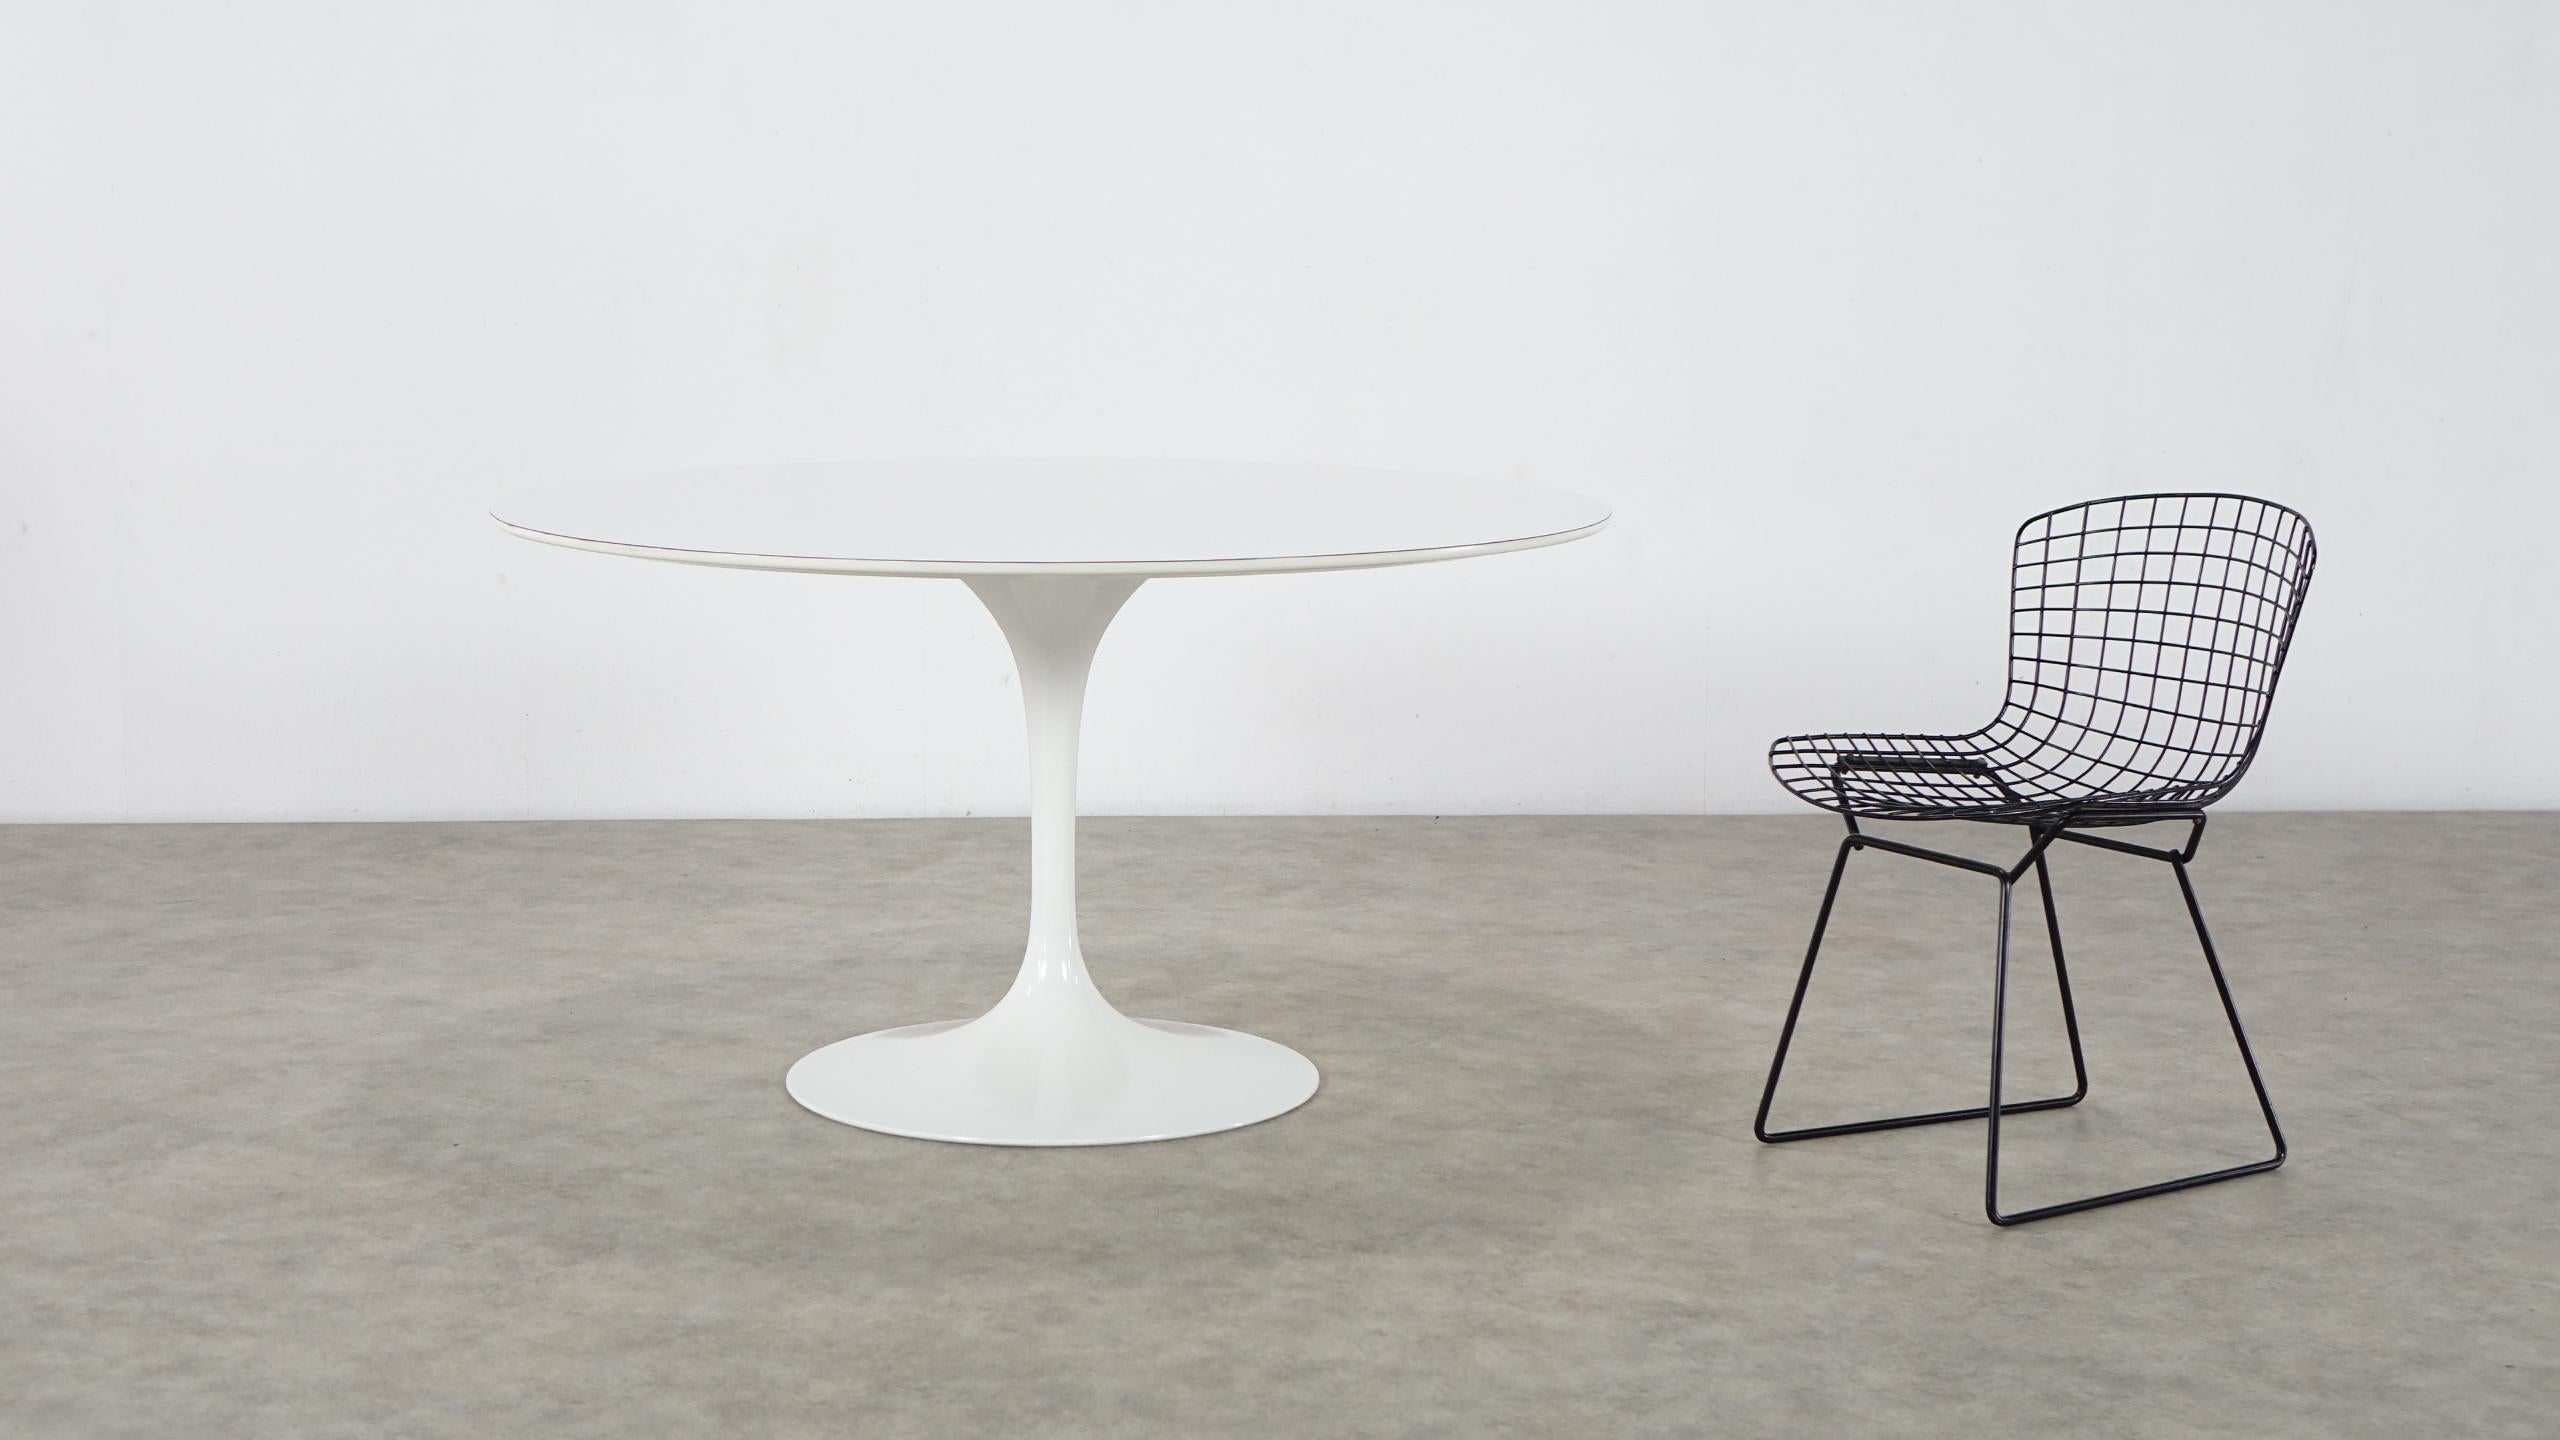 Eero Saarinen, round laminated dining table, 1955 for Knoll International
The table comes from a German household of architects. Due to the size of the table, 6 chairs can be placed on the table. The table is in very good condition.

Eero